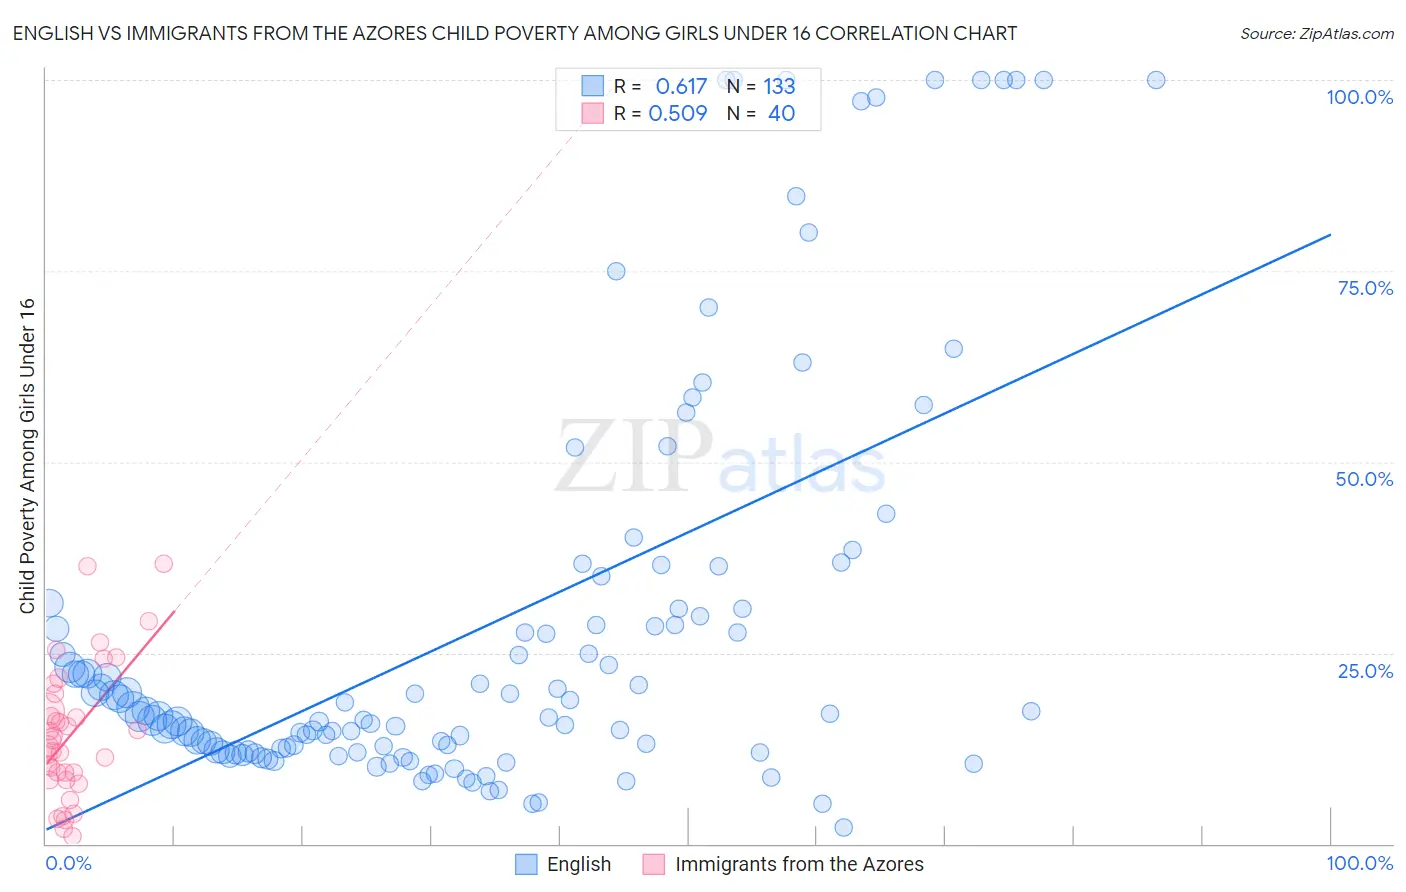 English vs Immigrants from the Azores Child Poverty Among Girls Under 16